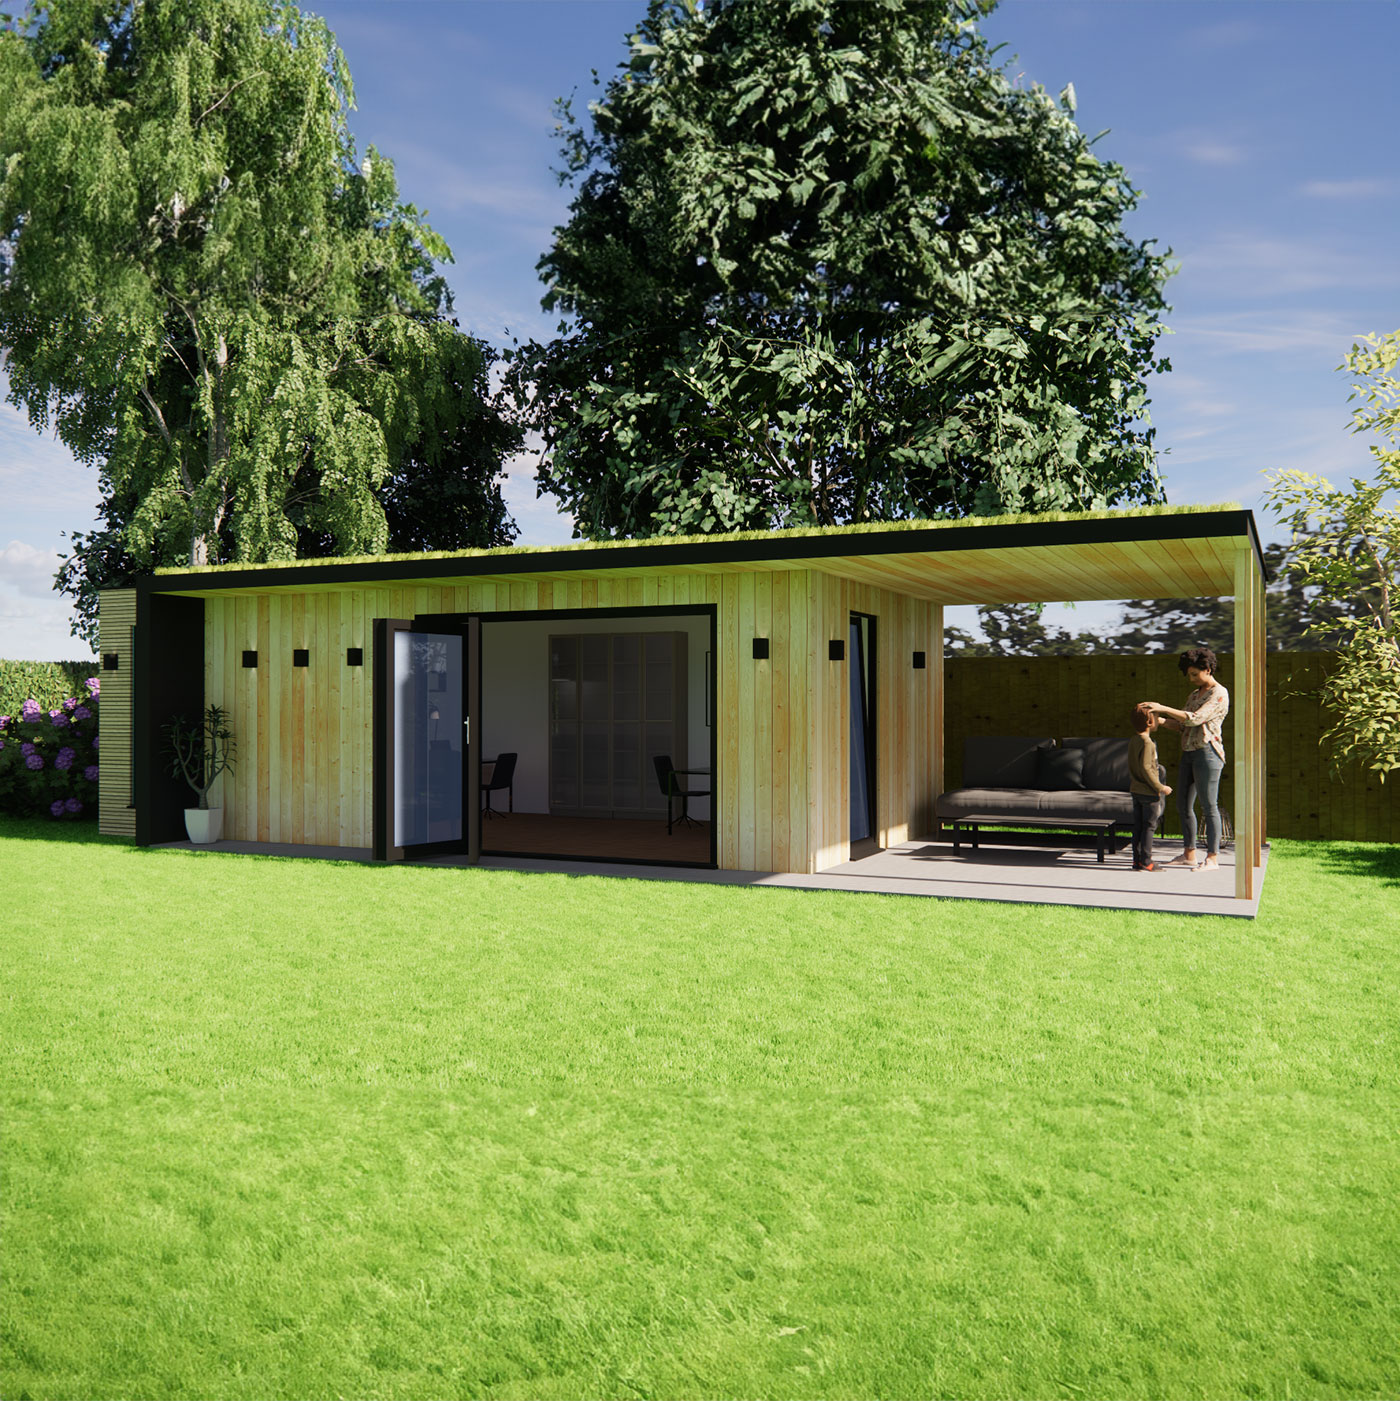 Visualisation of garden office with green roof 3.6m by 7.4m